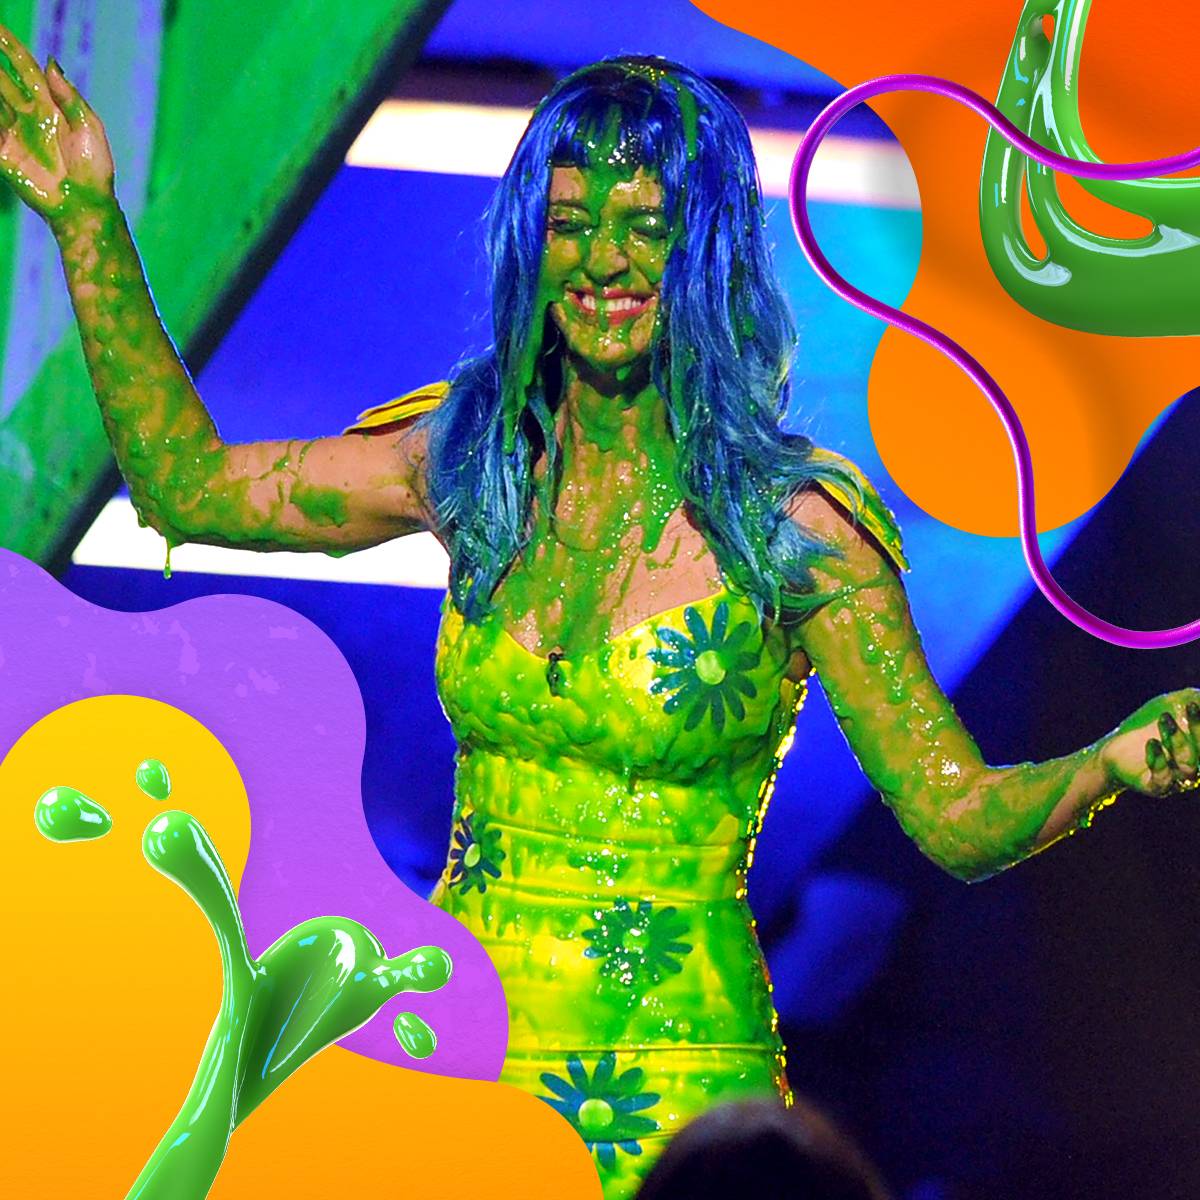 Katy Perry covered in slimed at the Kids' Choice Awards 2023.